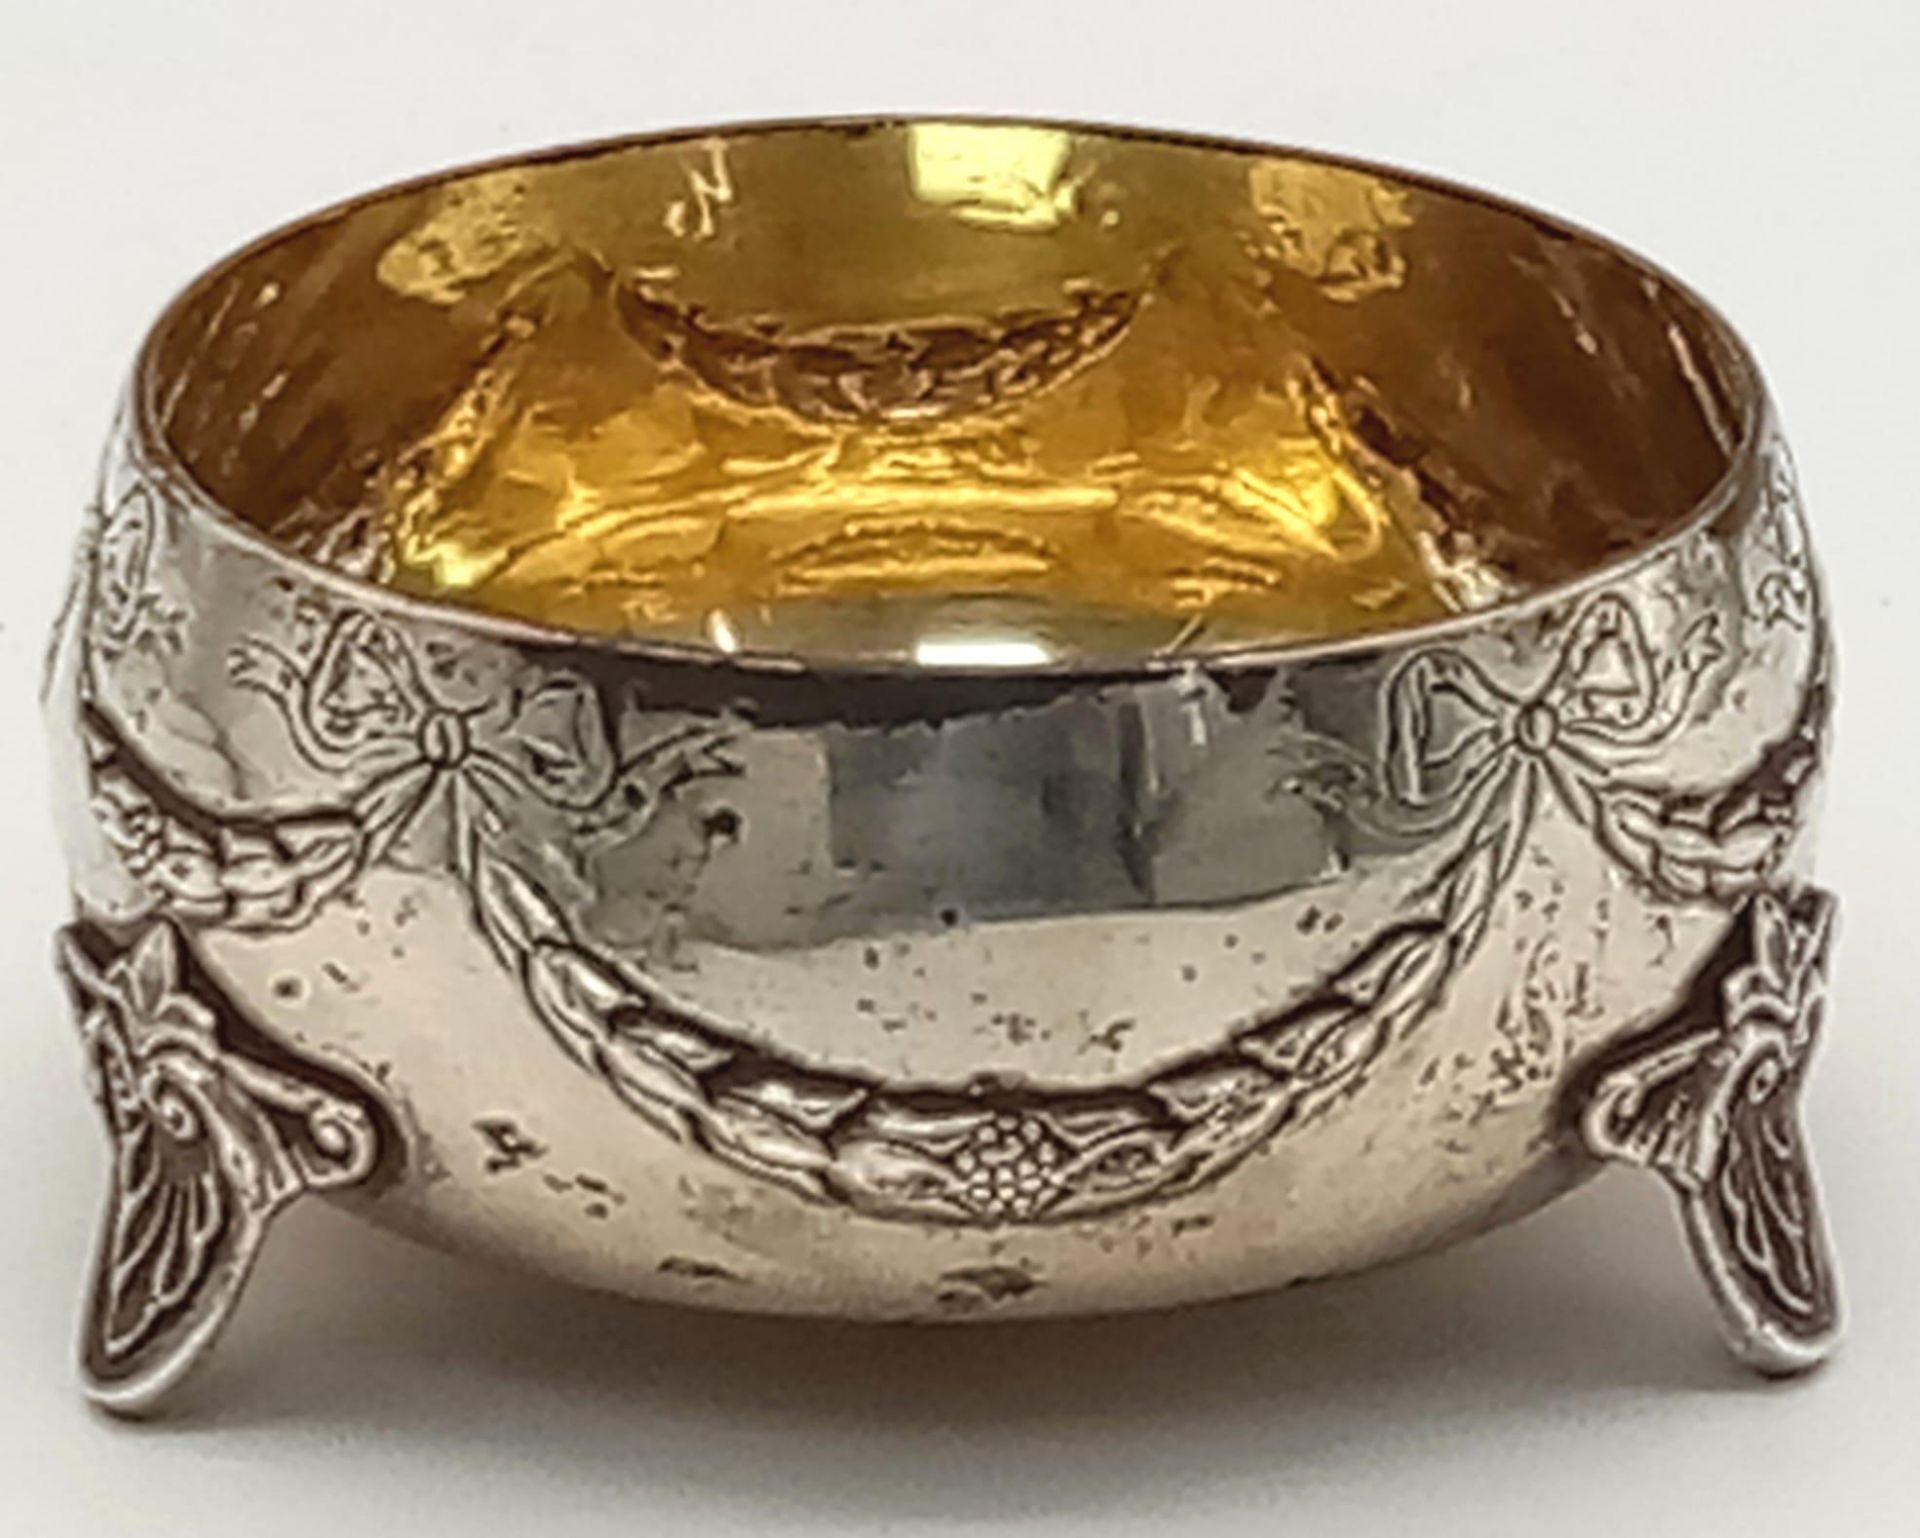 An antique Victorian solid silver salt cellar with fabulous engravings. Full hallmarks London, 1877.